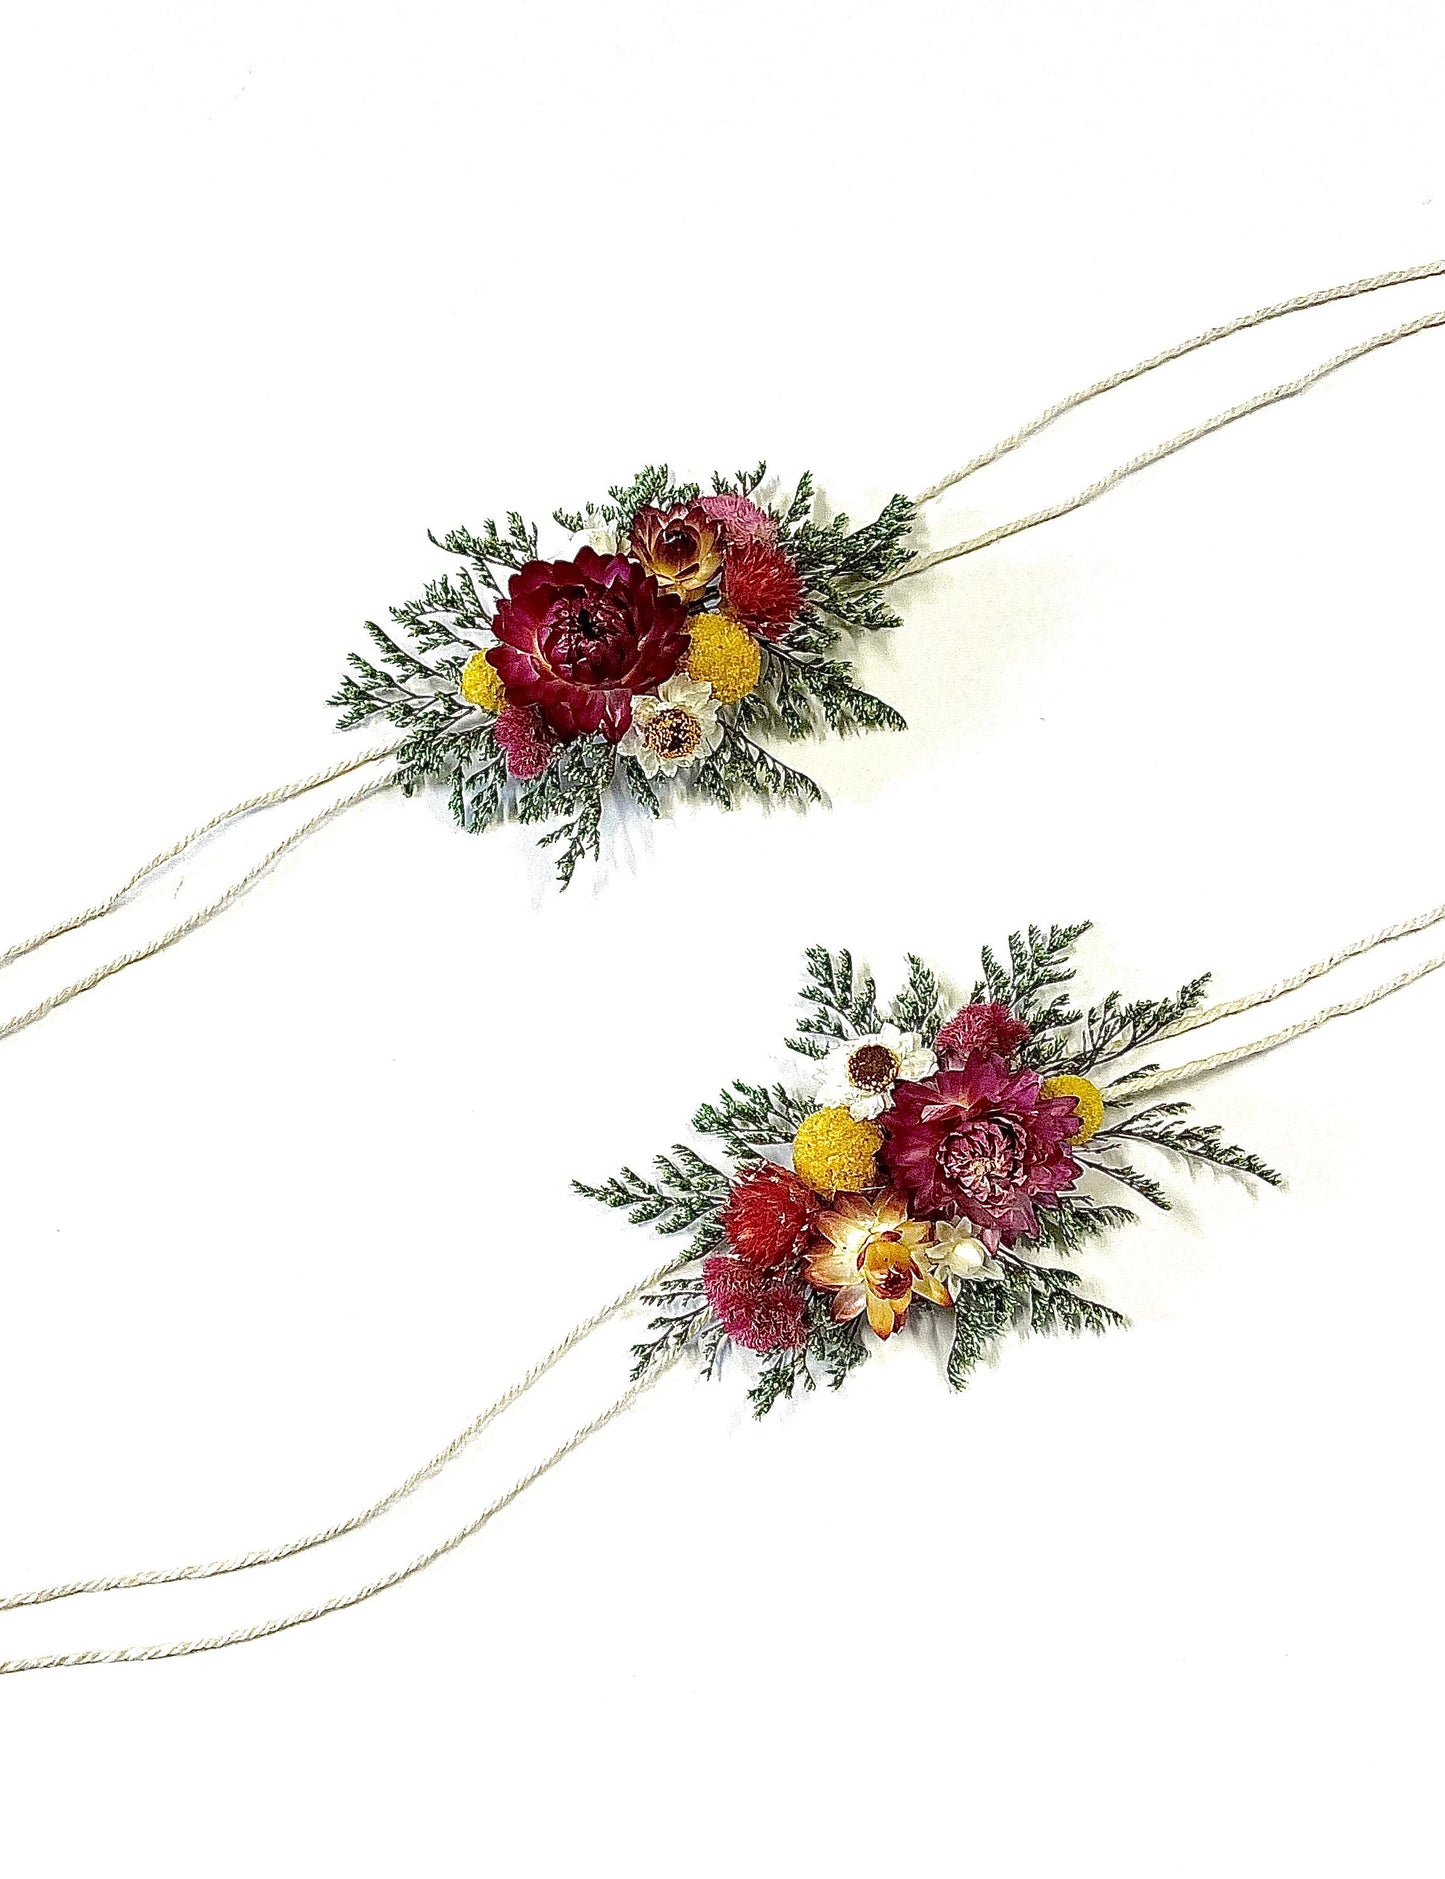 Hair Comb, Corsage, Wedding Accessories, Dried Flowers, Preserved Flowers, Strawflowers, Bridal Accessories, Hair Accessories, Colorful